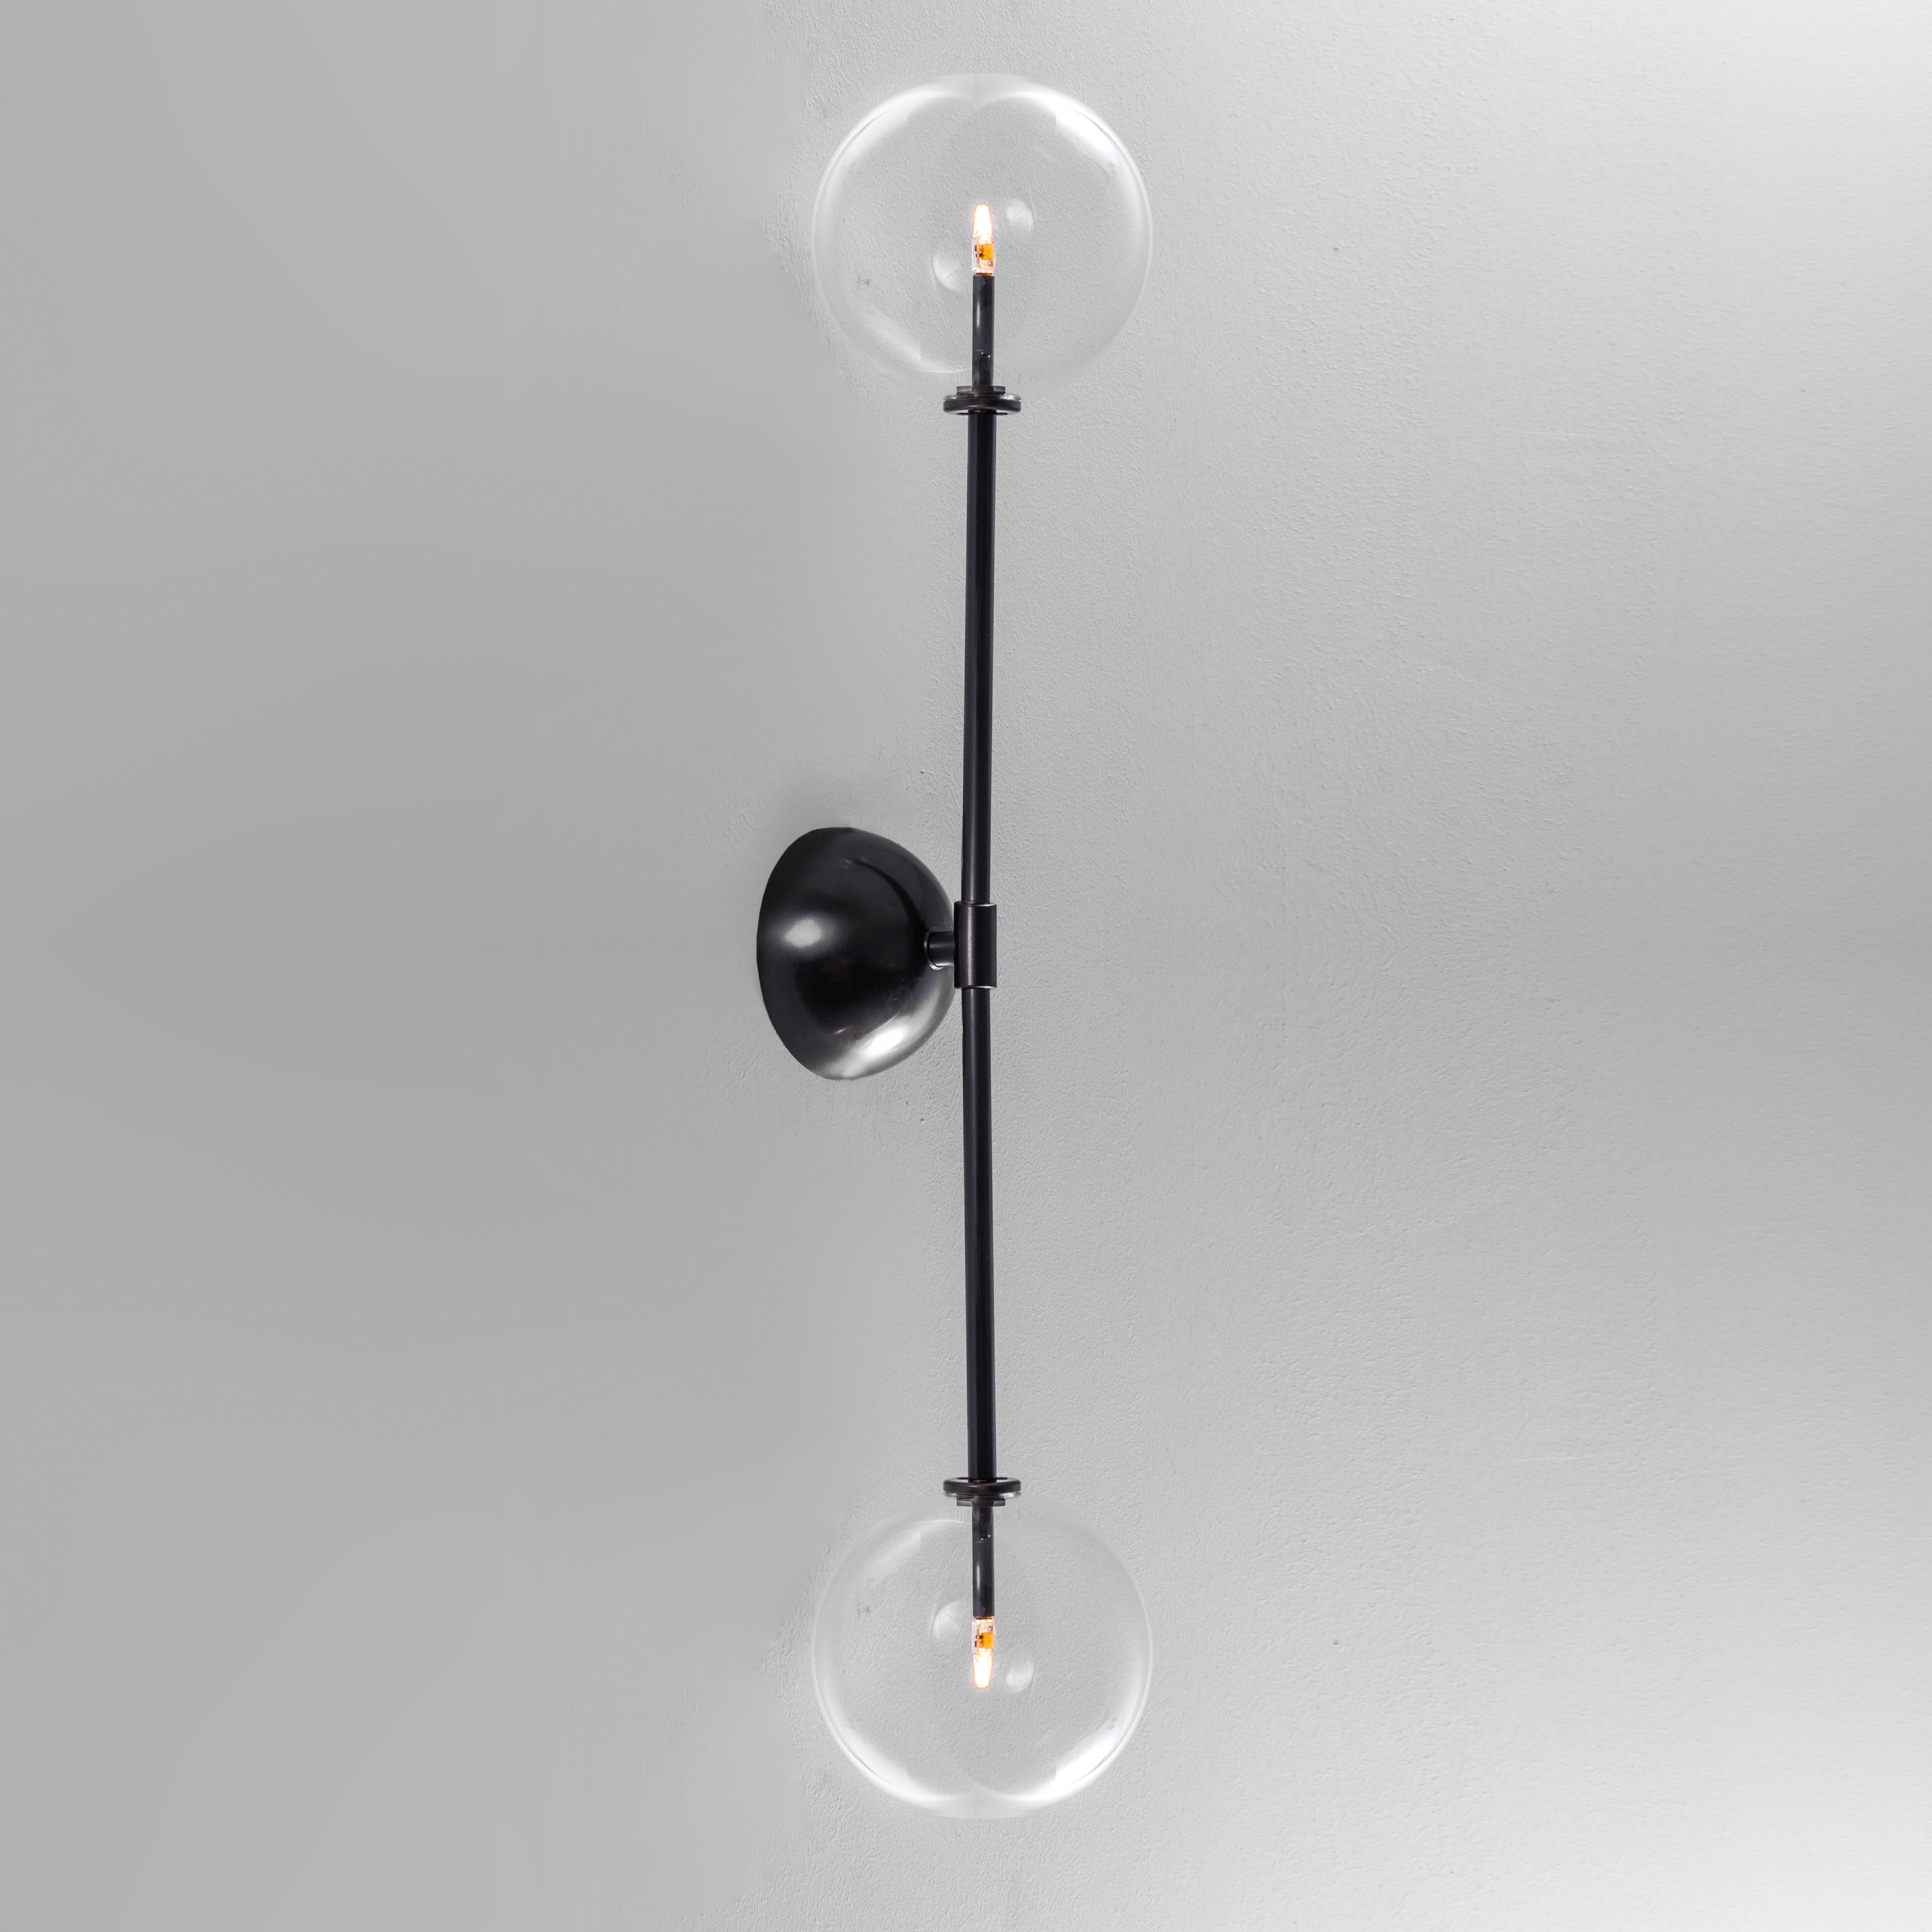 Miron Wall Sconce by Schwung
Dimensions: W 15 x D 16 x H 79 cm
Materials: Black gunmetal, hand blown glass globes

Finishes available: Black gunmetal, polished nickel, brass

Schwung is a German word, and loosely defined, means energy or momentumm